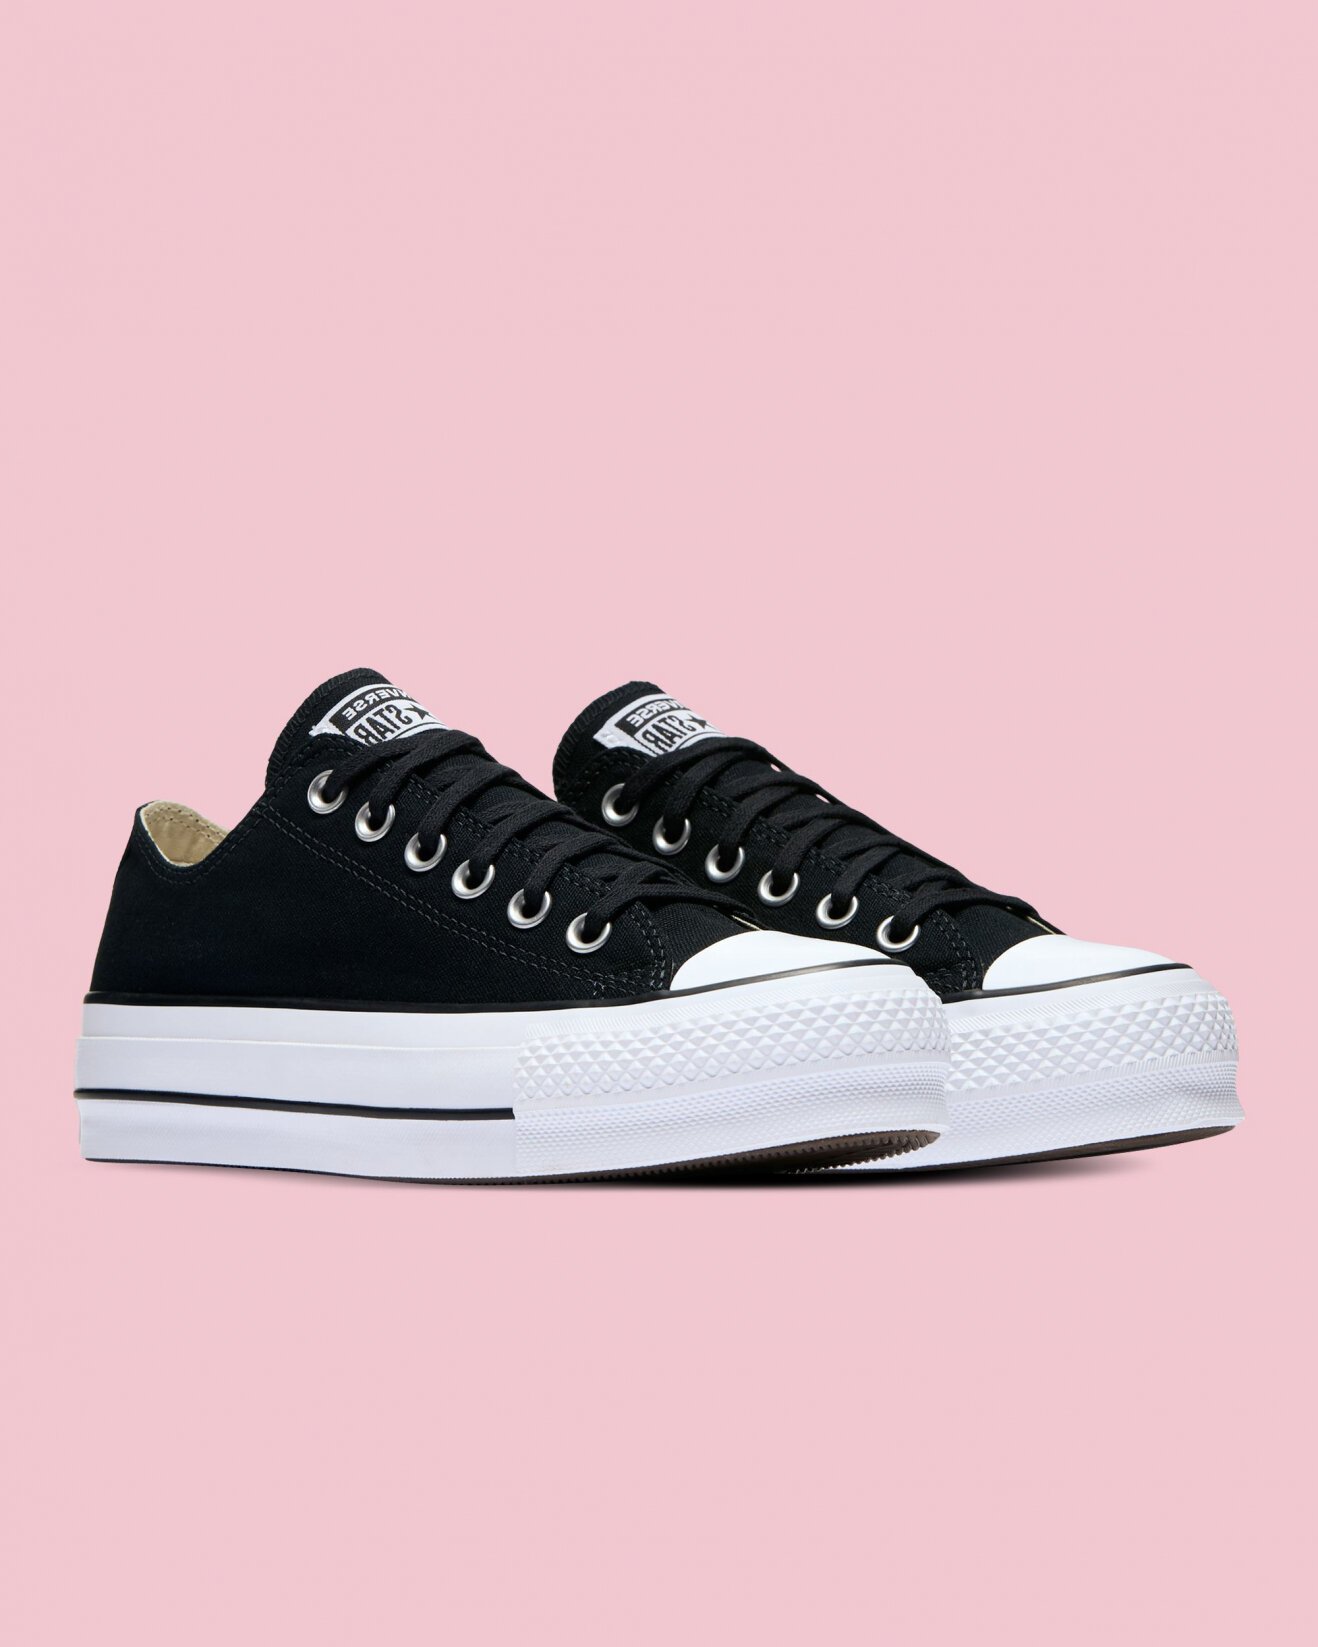 Converse Chuck Taylor All Star Canvas Lift Low Top Womens - Buy Online -  Ph: 1800-370-766 - AfterPay & ZipPay Available!